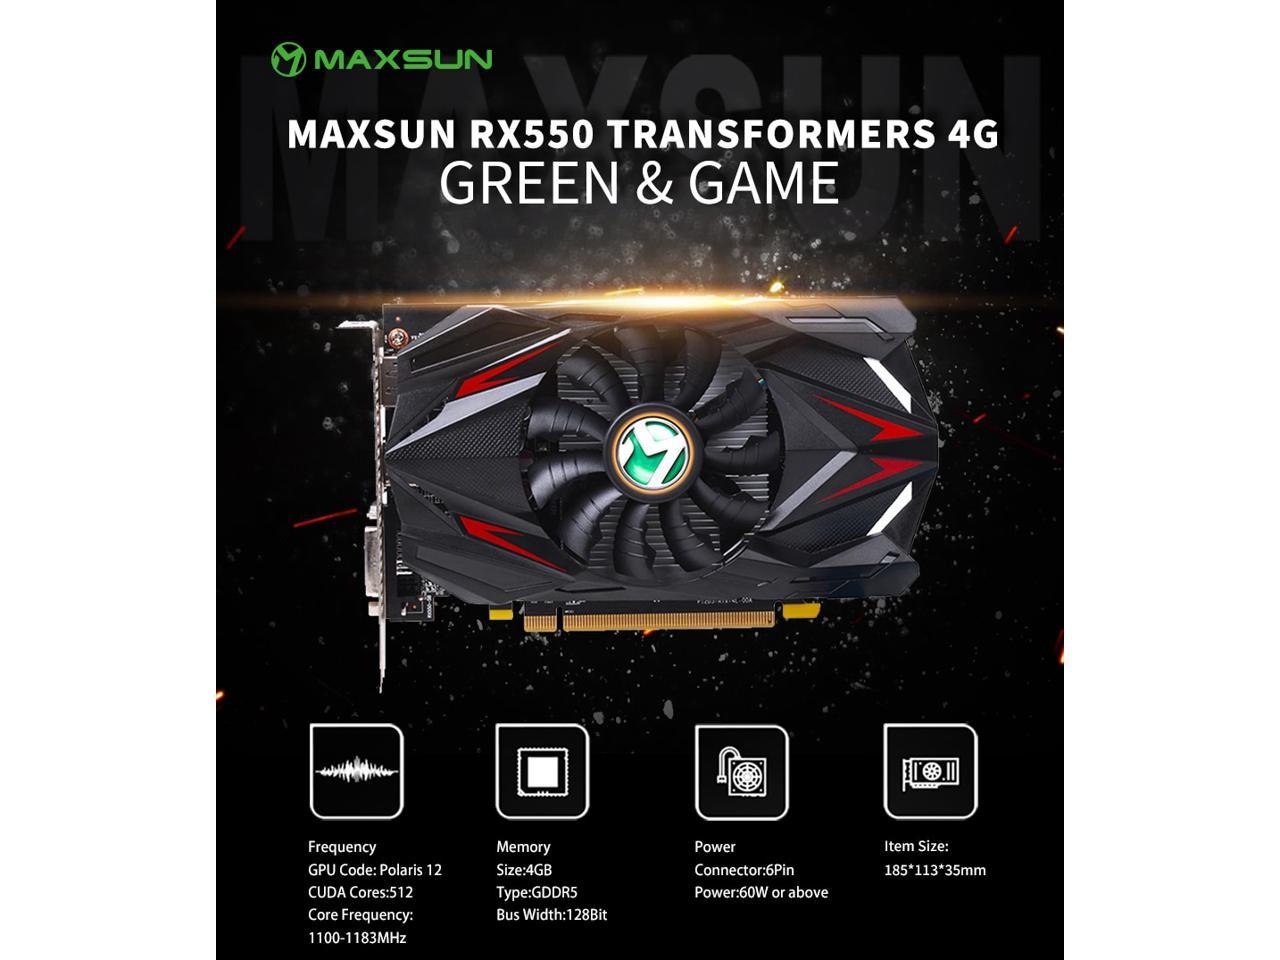 Radeon Rx 550 4G Graphic Card DDR5 Gpu Gaming Video Card Video For Pc New Blade Cooling System 9Cm Large Size Frost Blade Fan GPUs / Video Graphics Cards - Newegg.com